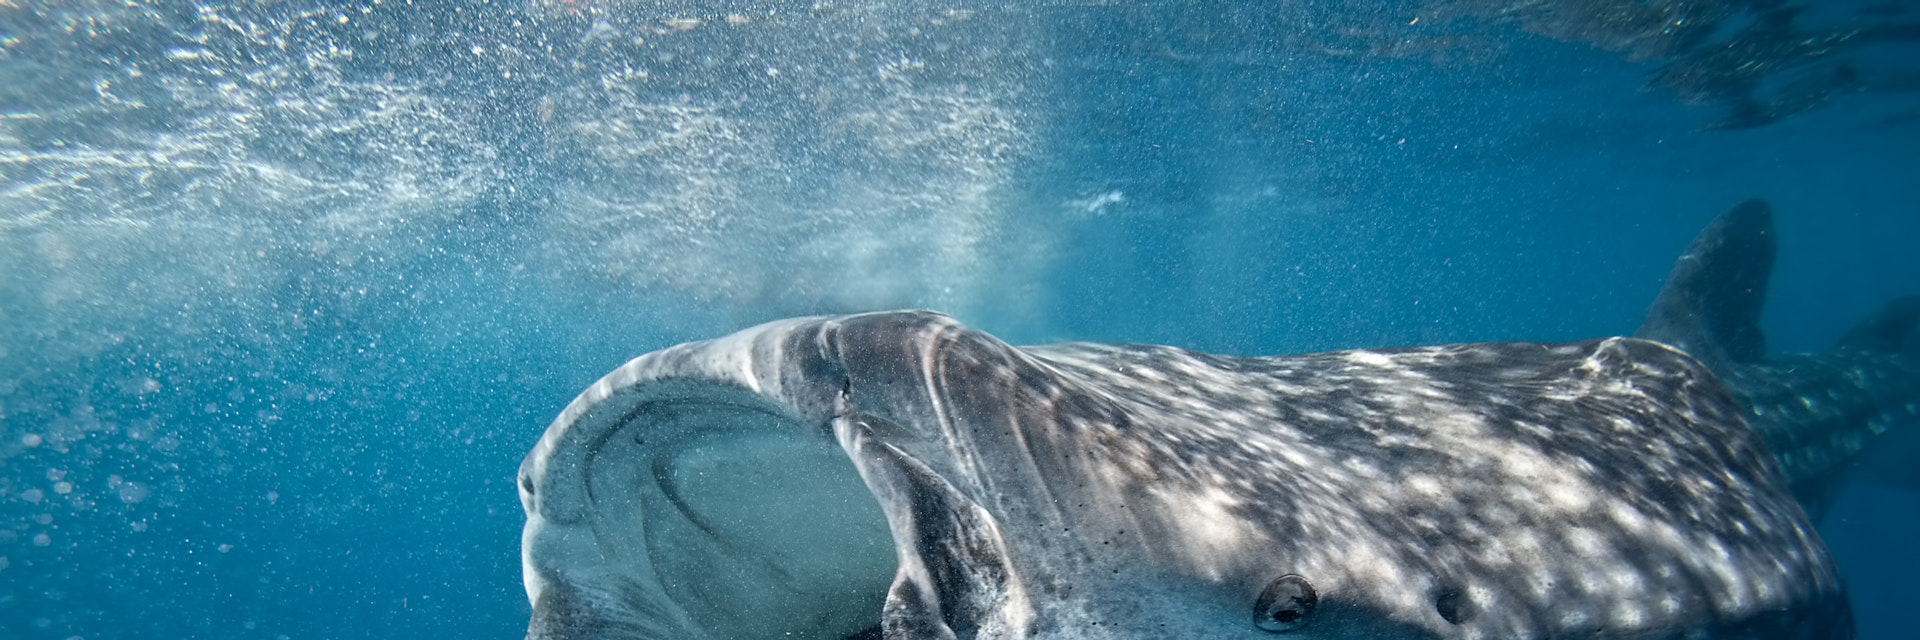 500px Photo ID: 81237435 - Although protected by many countries the whale shark is still illegally hunted for food, shark fin soup and it's oil...http://news.nationalgeographic.com/news/2014/01/140129-whale-shark-endangered-cites-ocean-animals-conservation/